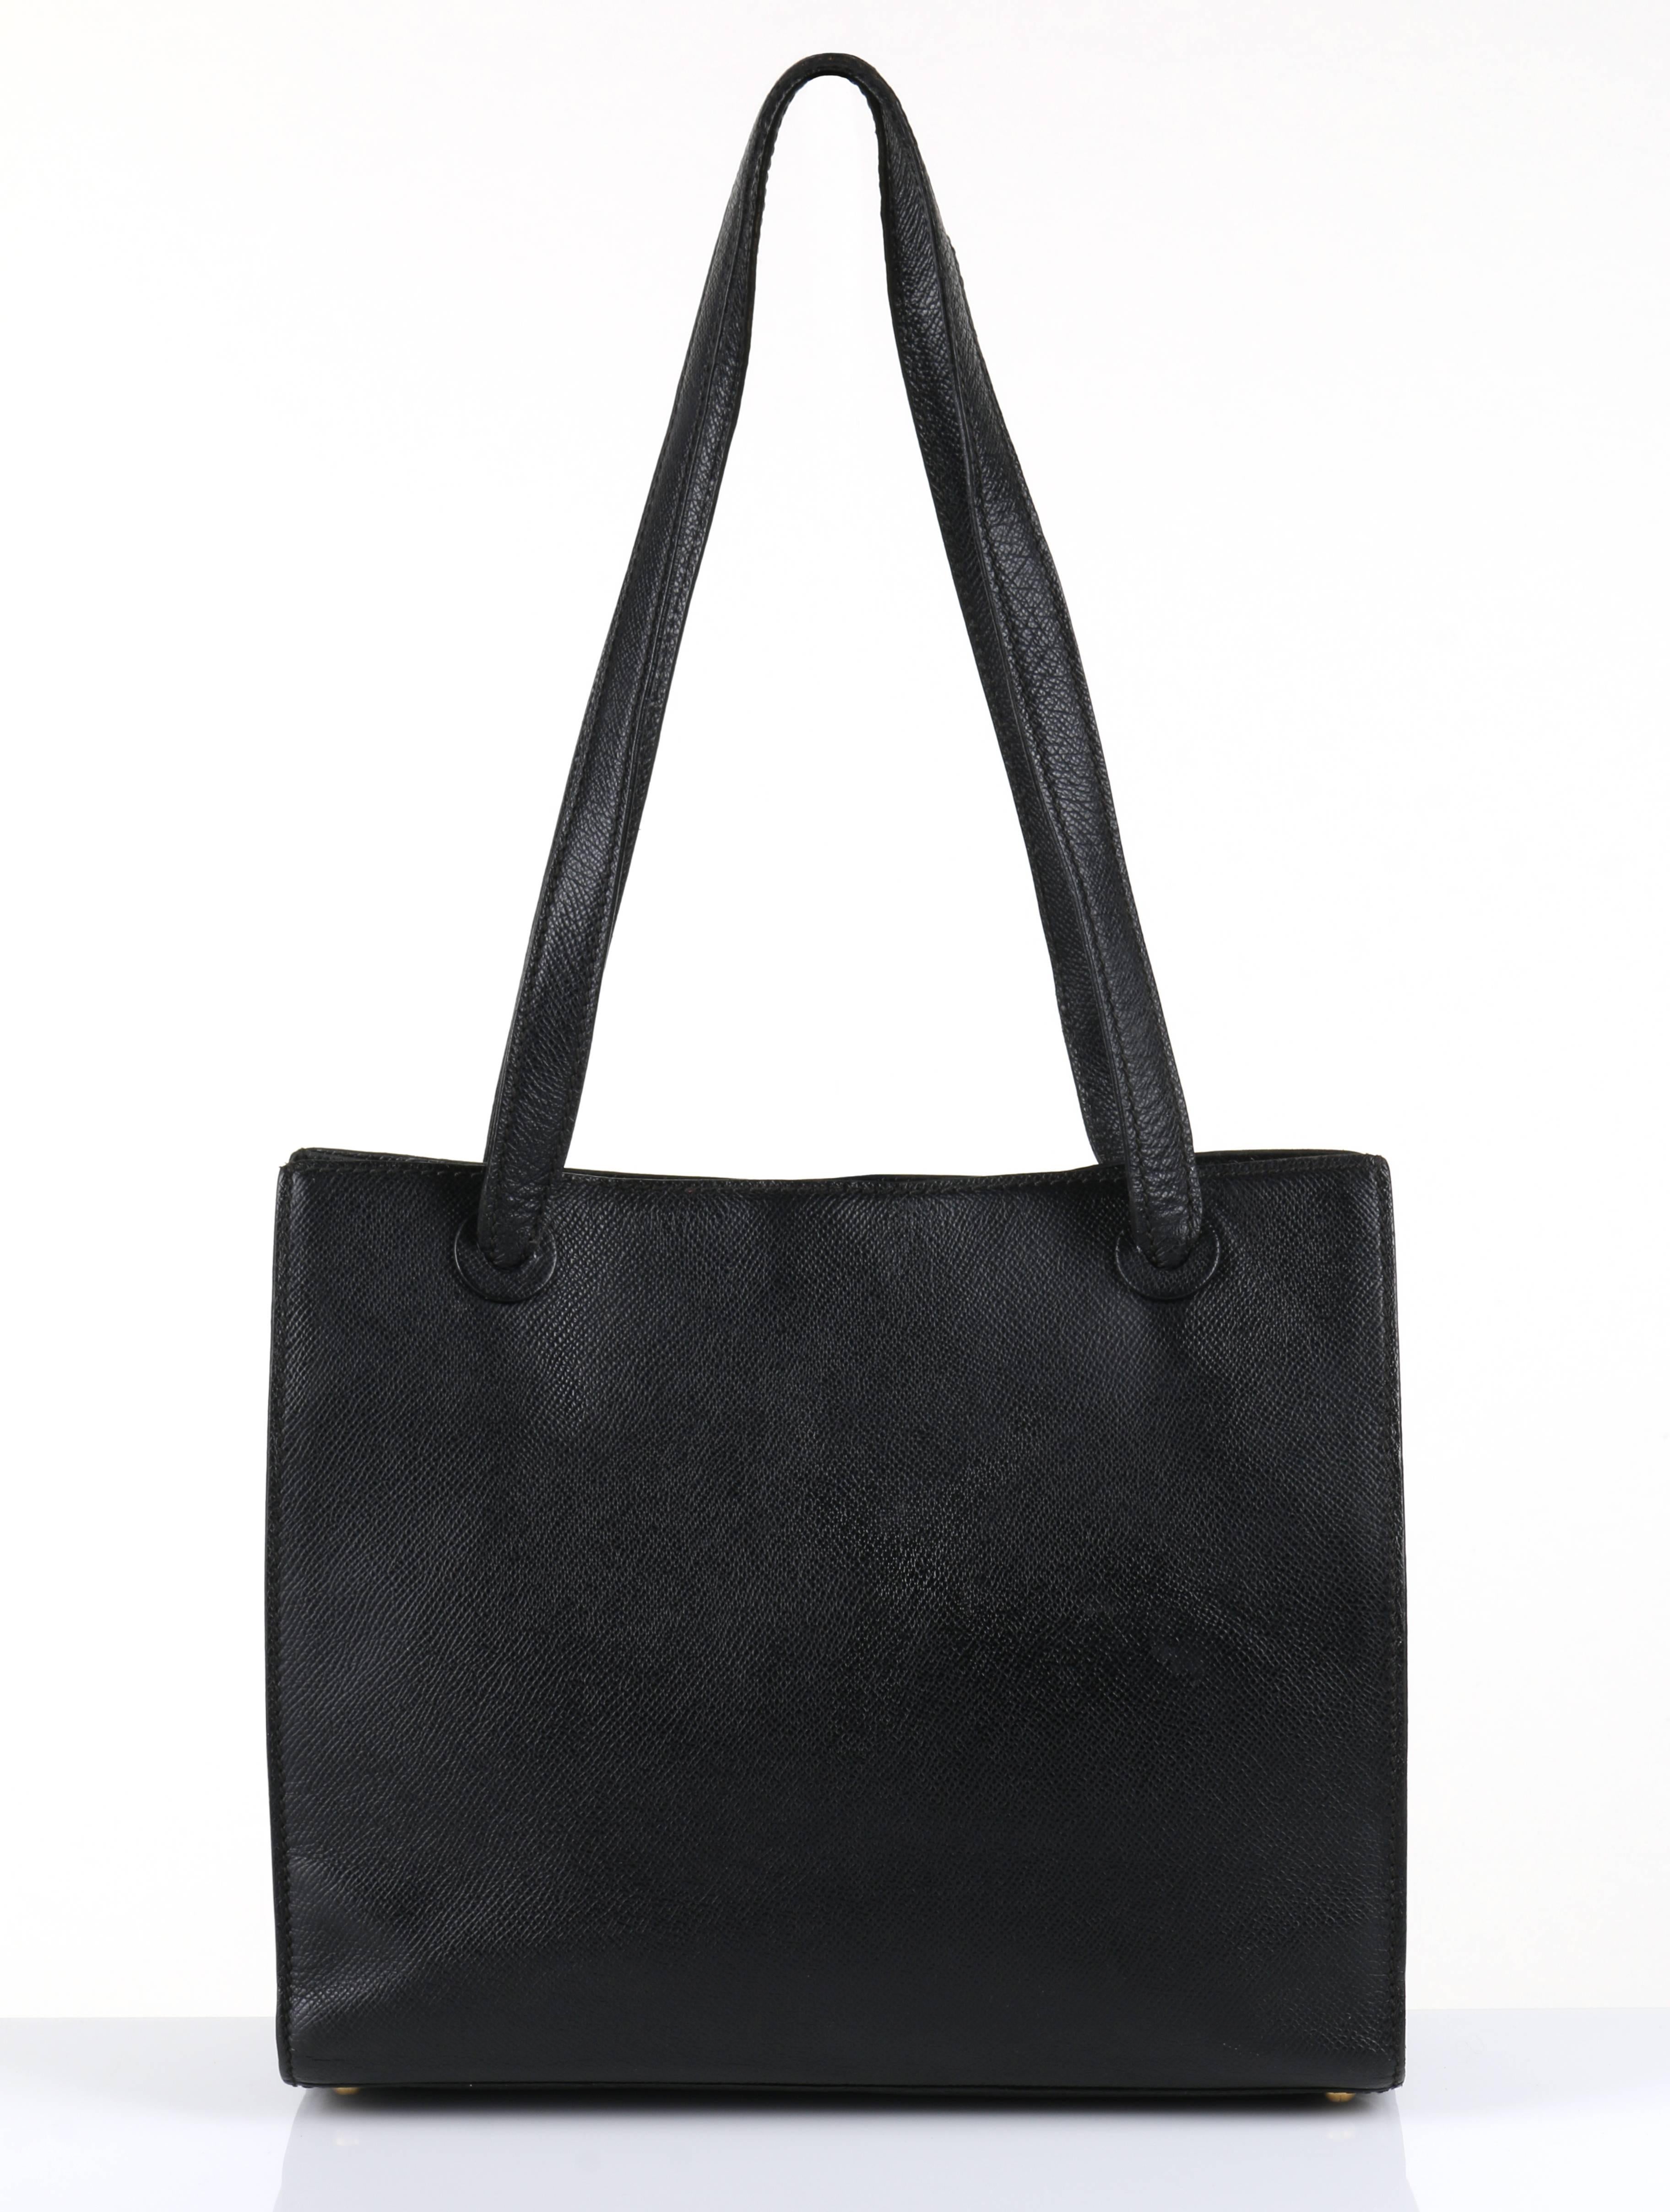 Chanel c.1990's black caviar structured leather tote.  Classic styling. Embossed 